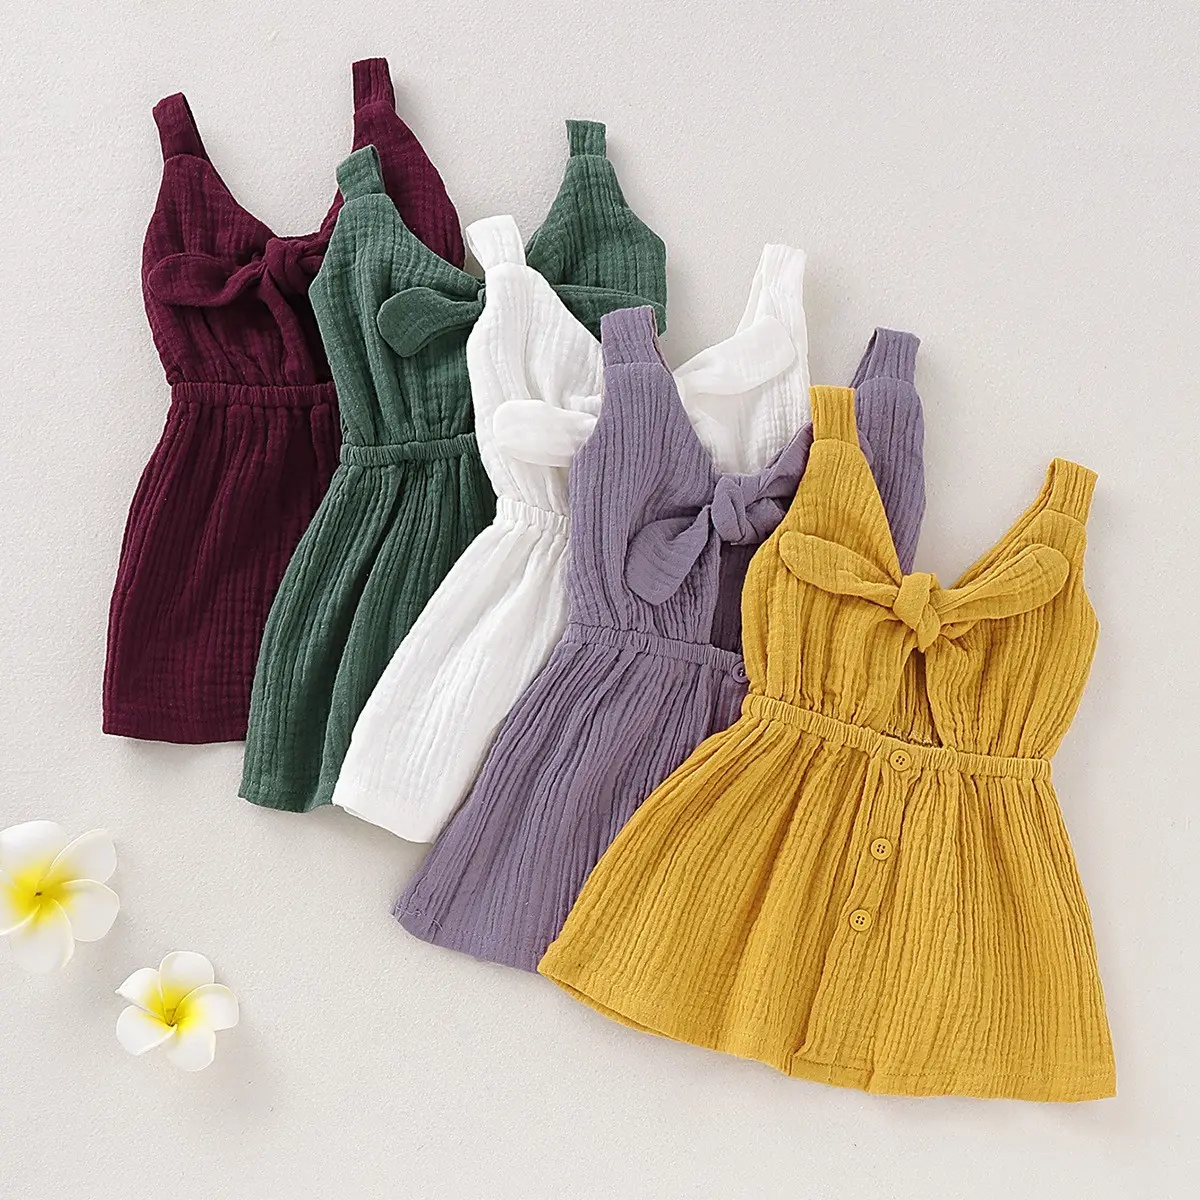 2022 Children's Summer Clothes INS style 100% cotton baby sleeveless dress for girls